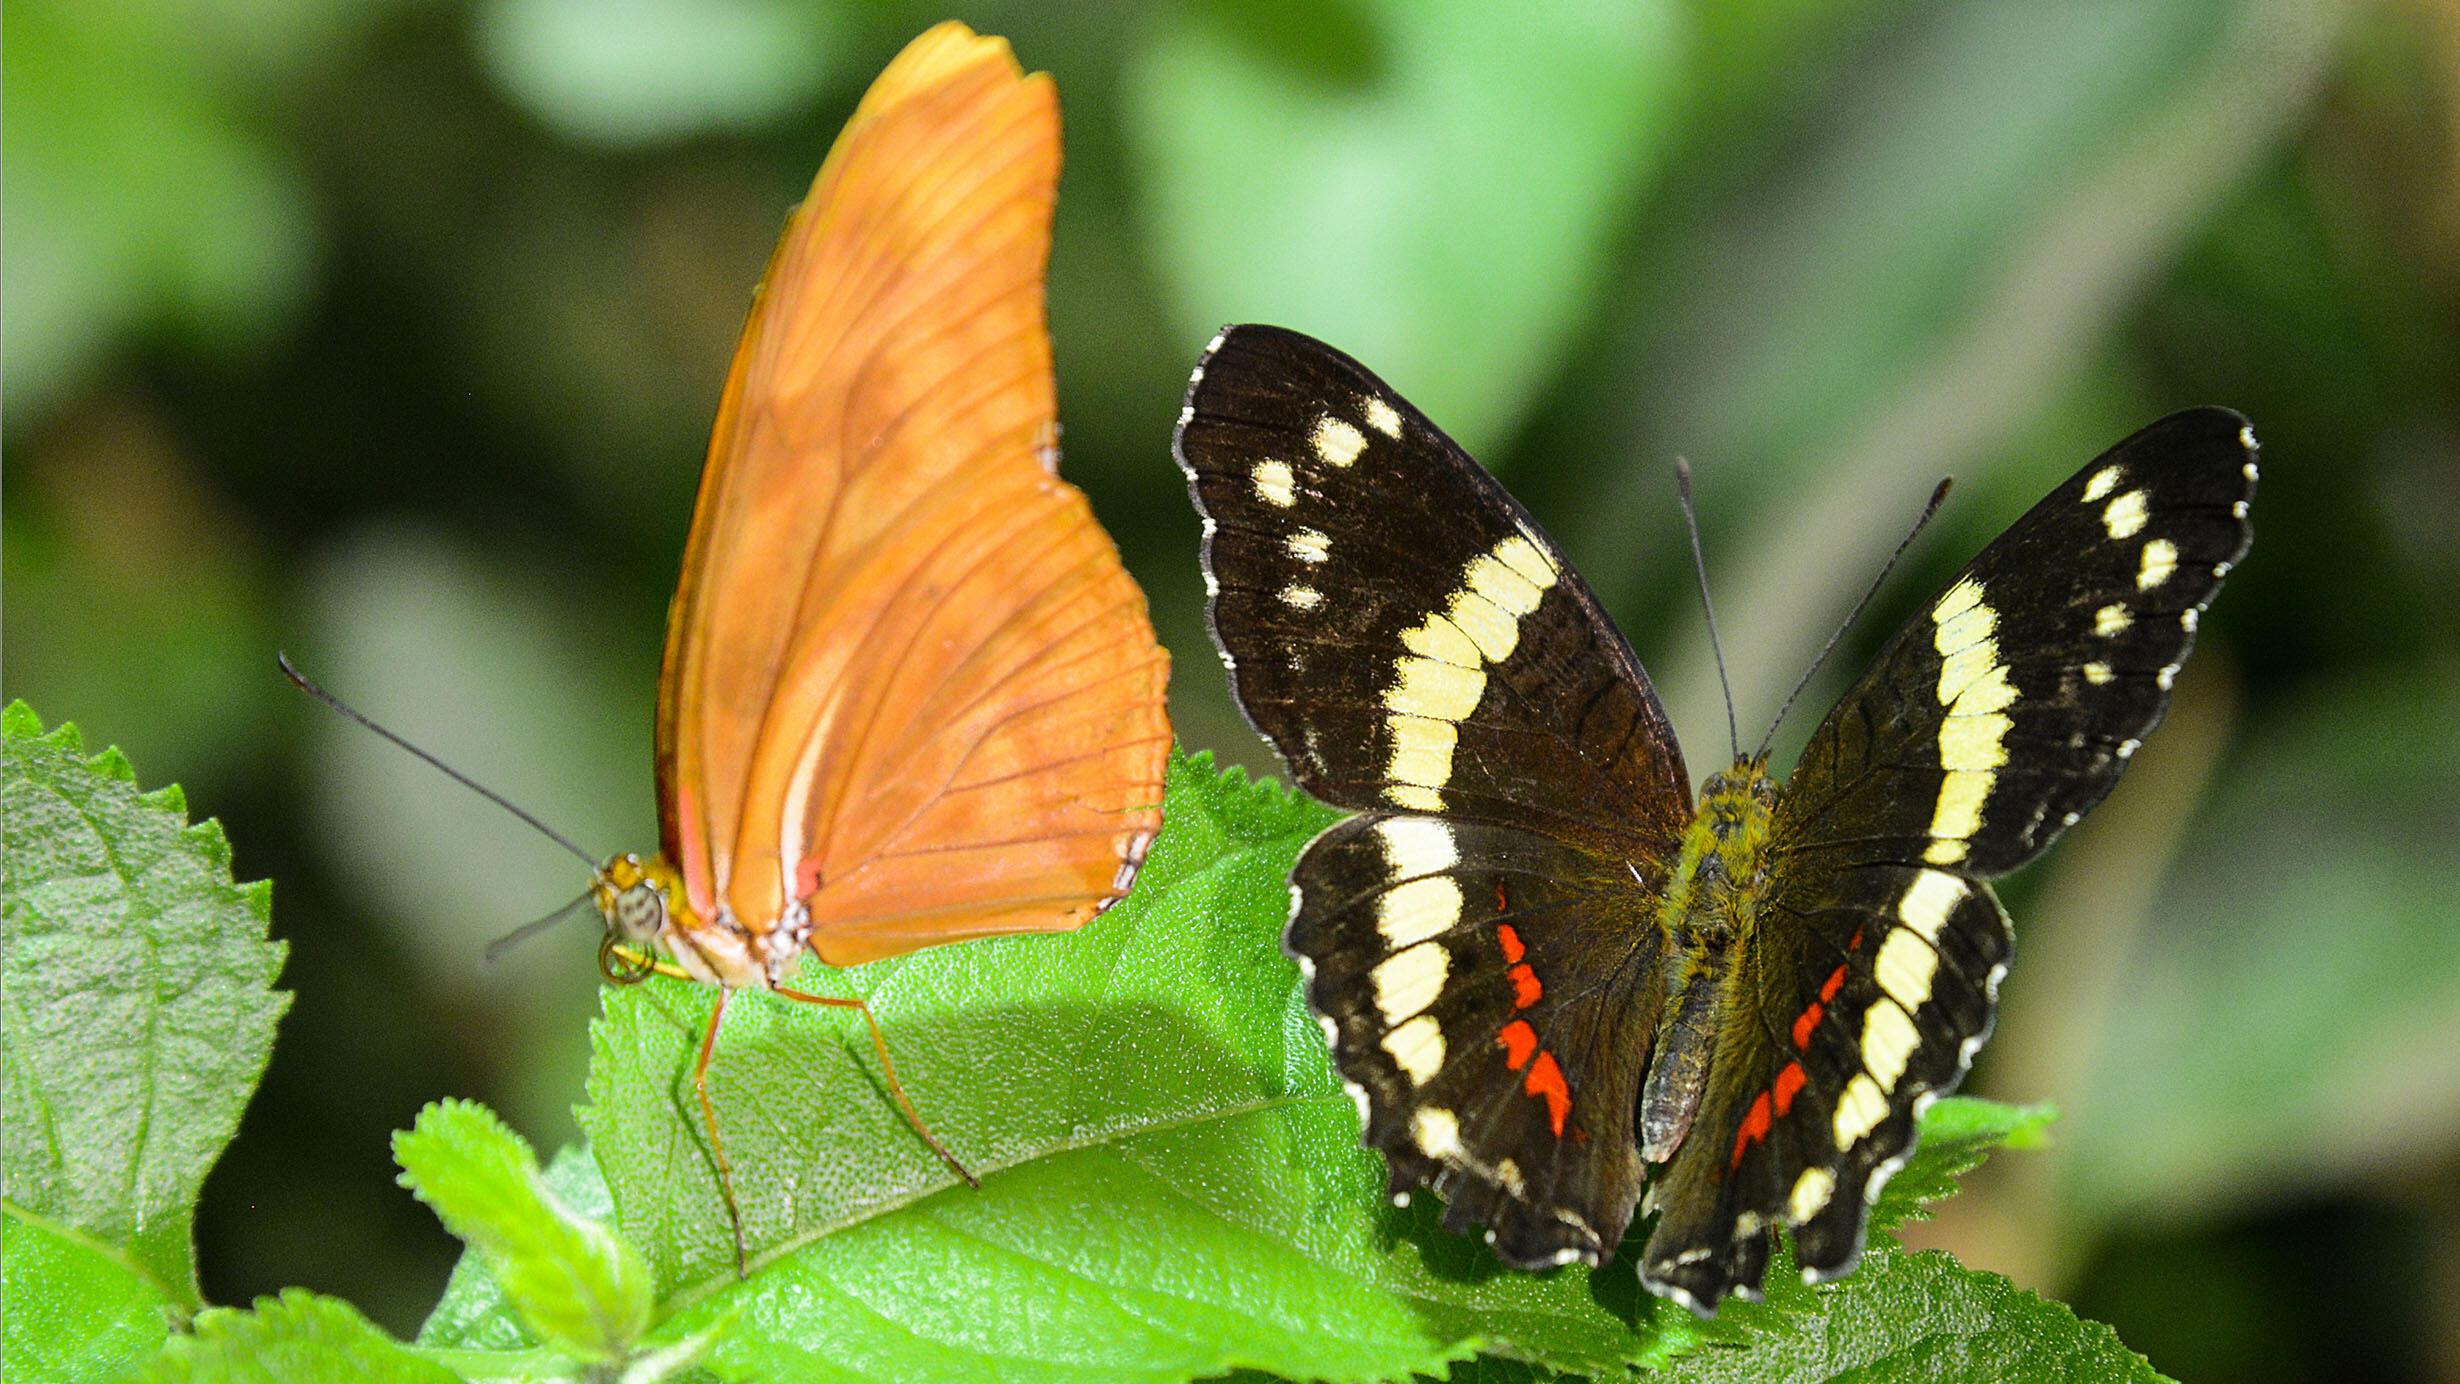 Two butterflies—one solid colored and one with a striped wing pattern—alight on a plant leaf.